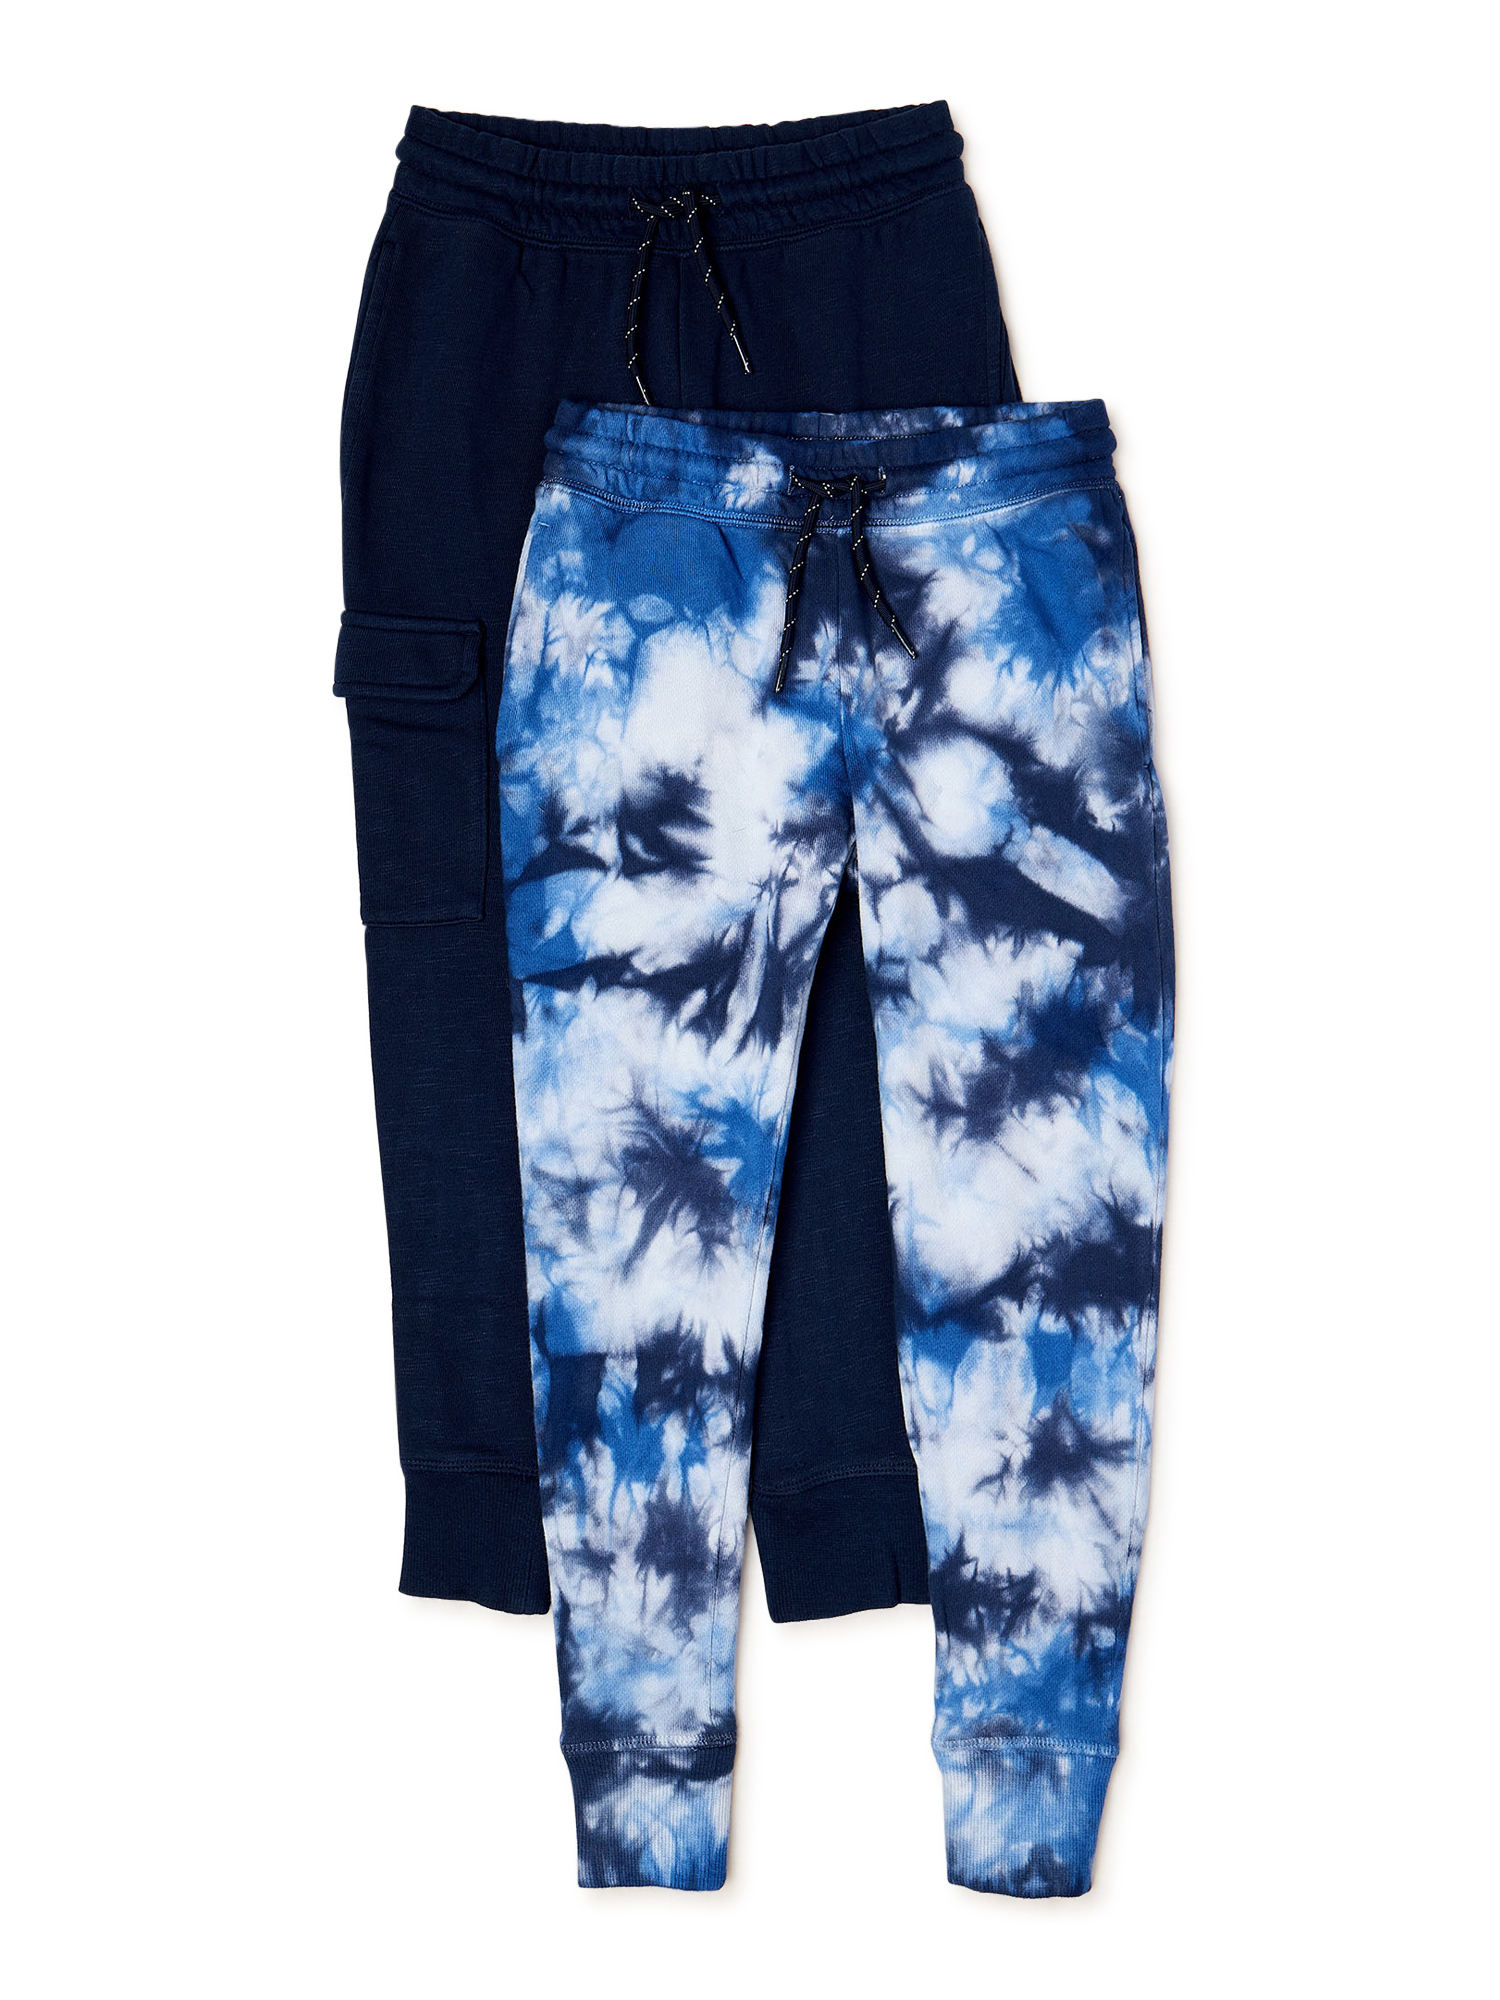 Wonder Nation Boys Printed French Terry Joggers, 2-Pack, Sizes 4-18 & Husky - image 1 of 3